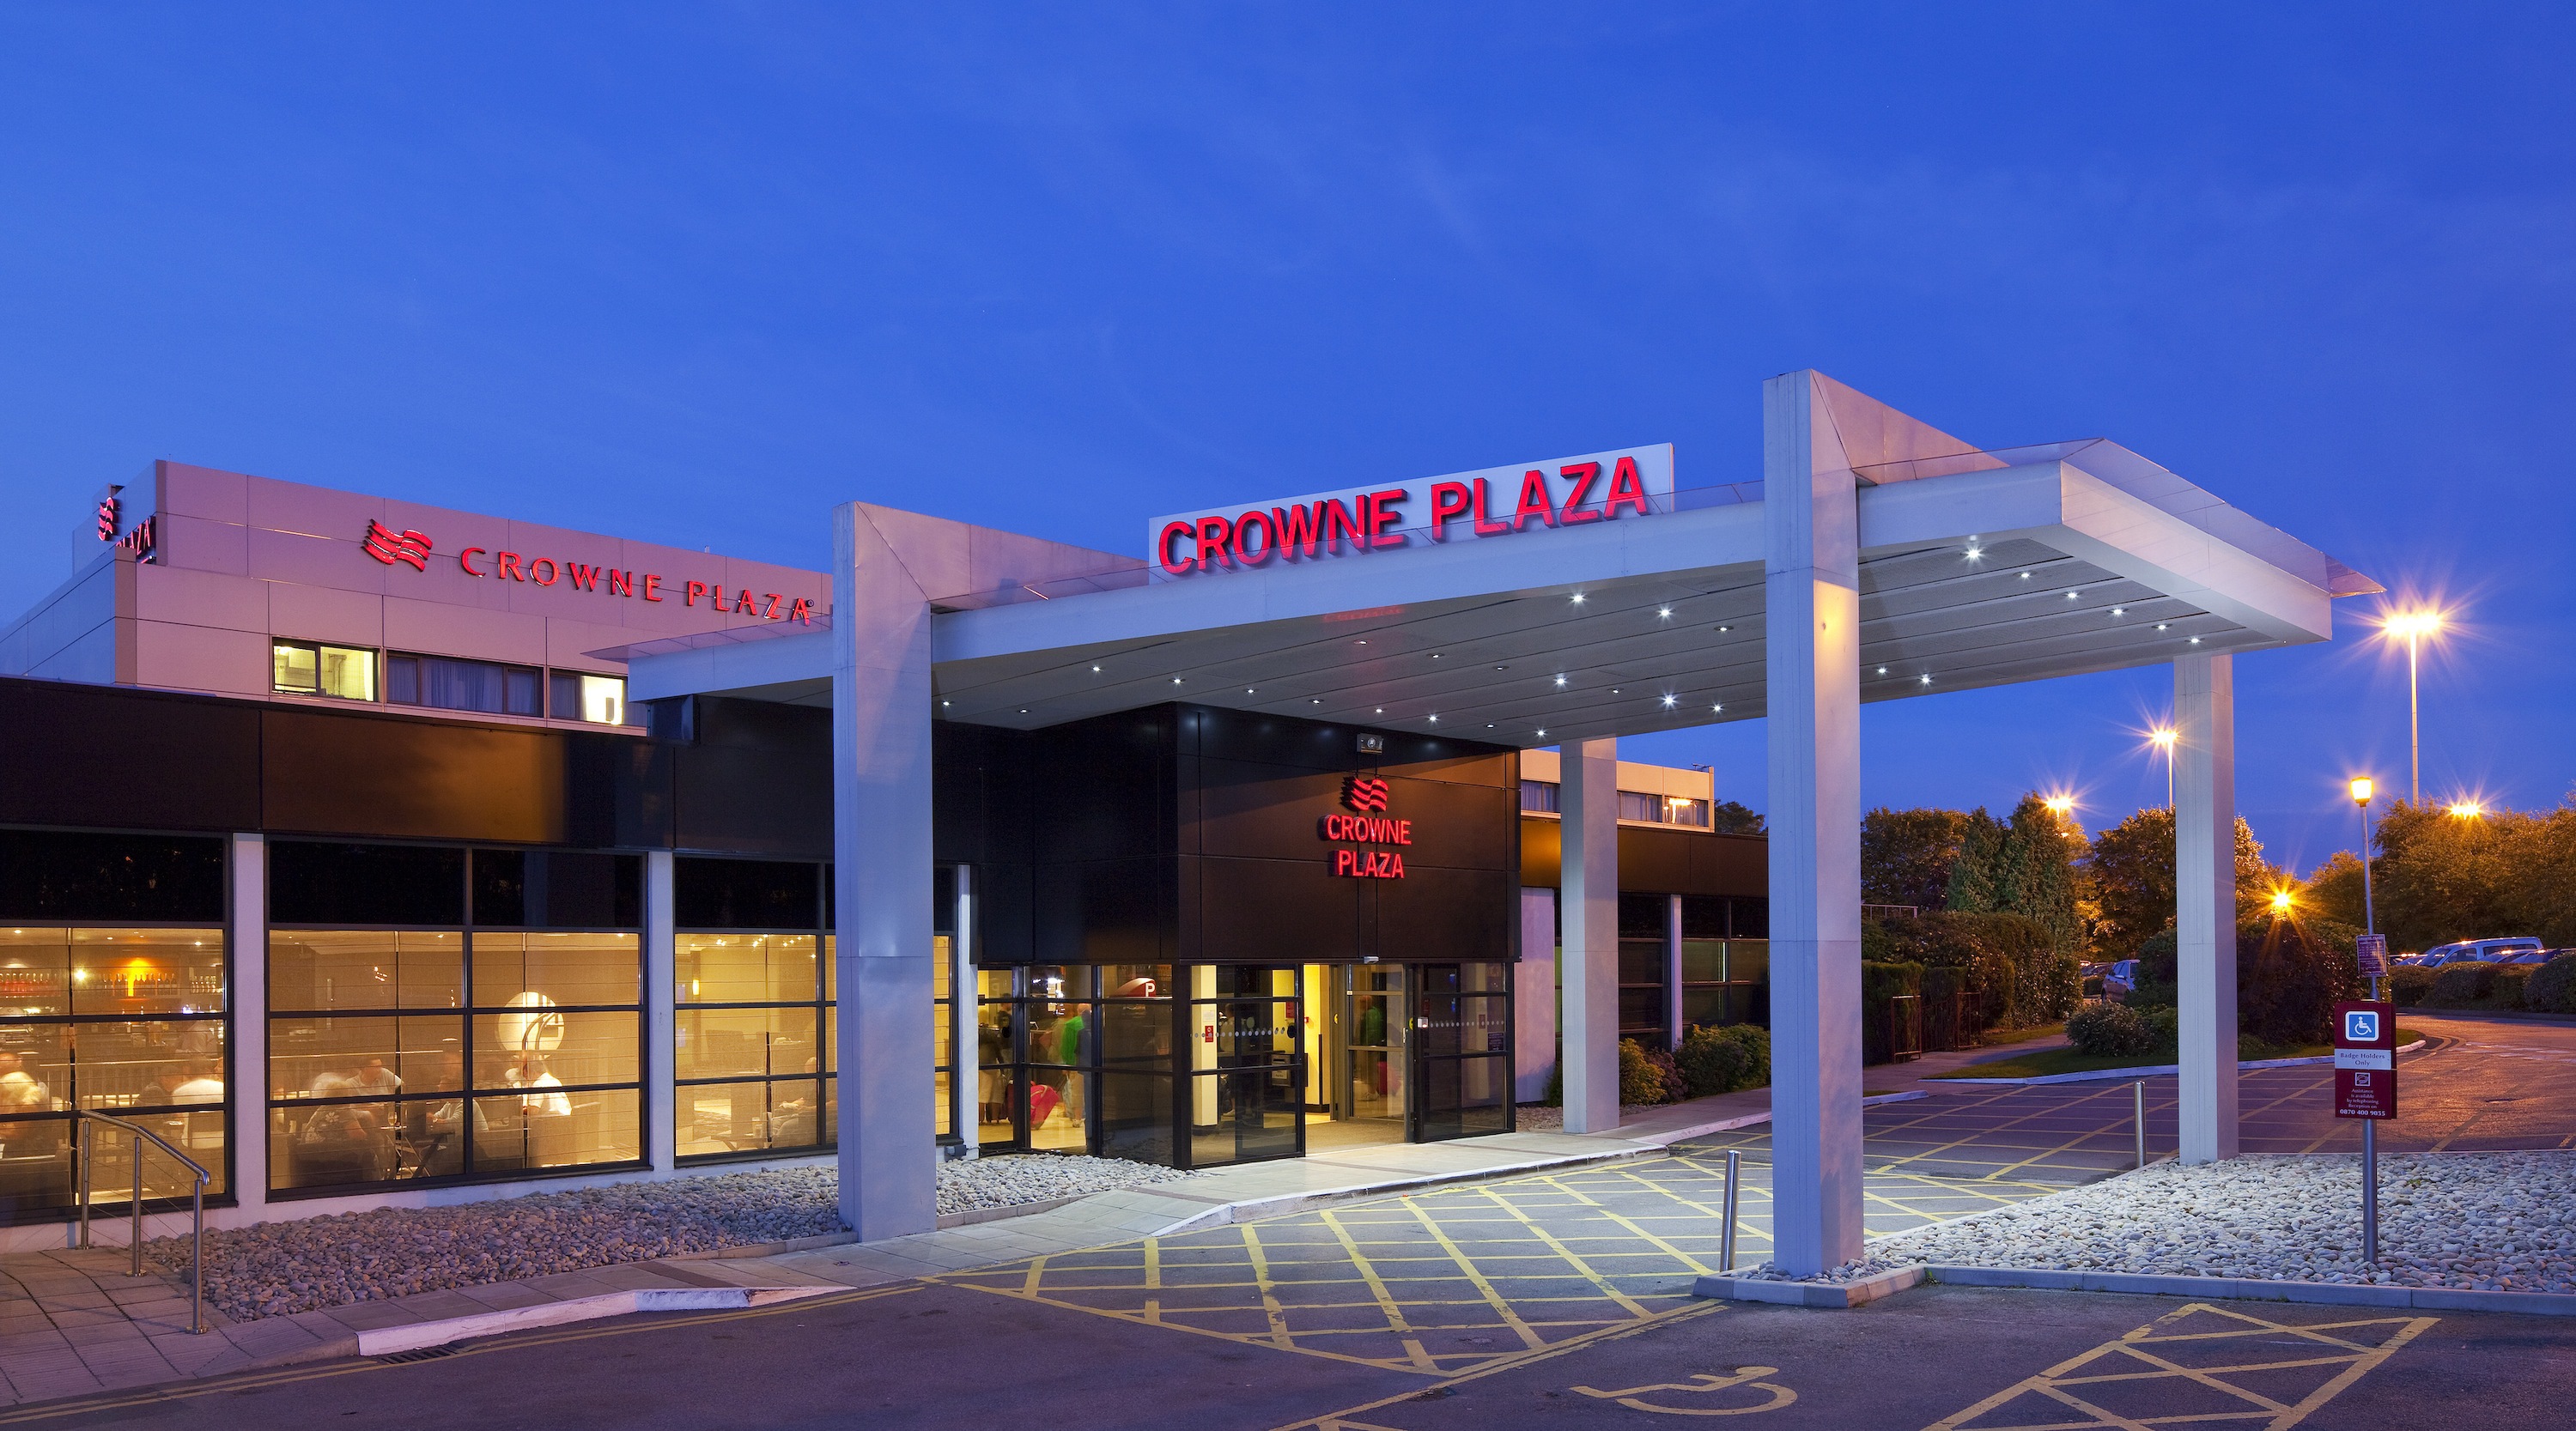 Photo of Crowne Plaza Manchester Airport, Manchester, United Kingdom